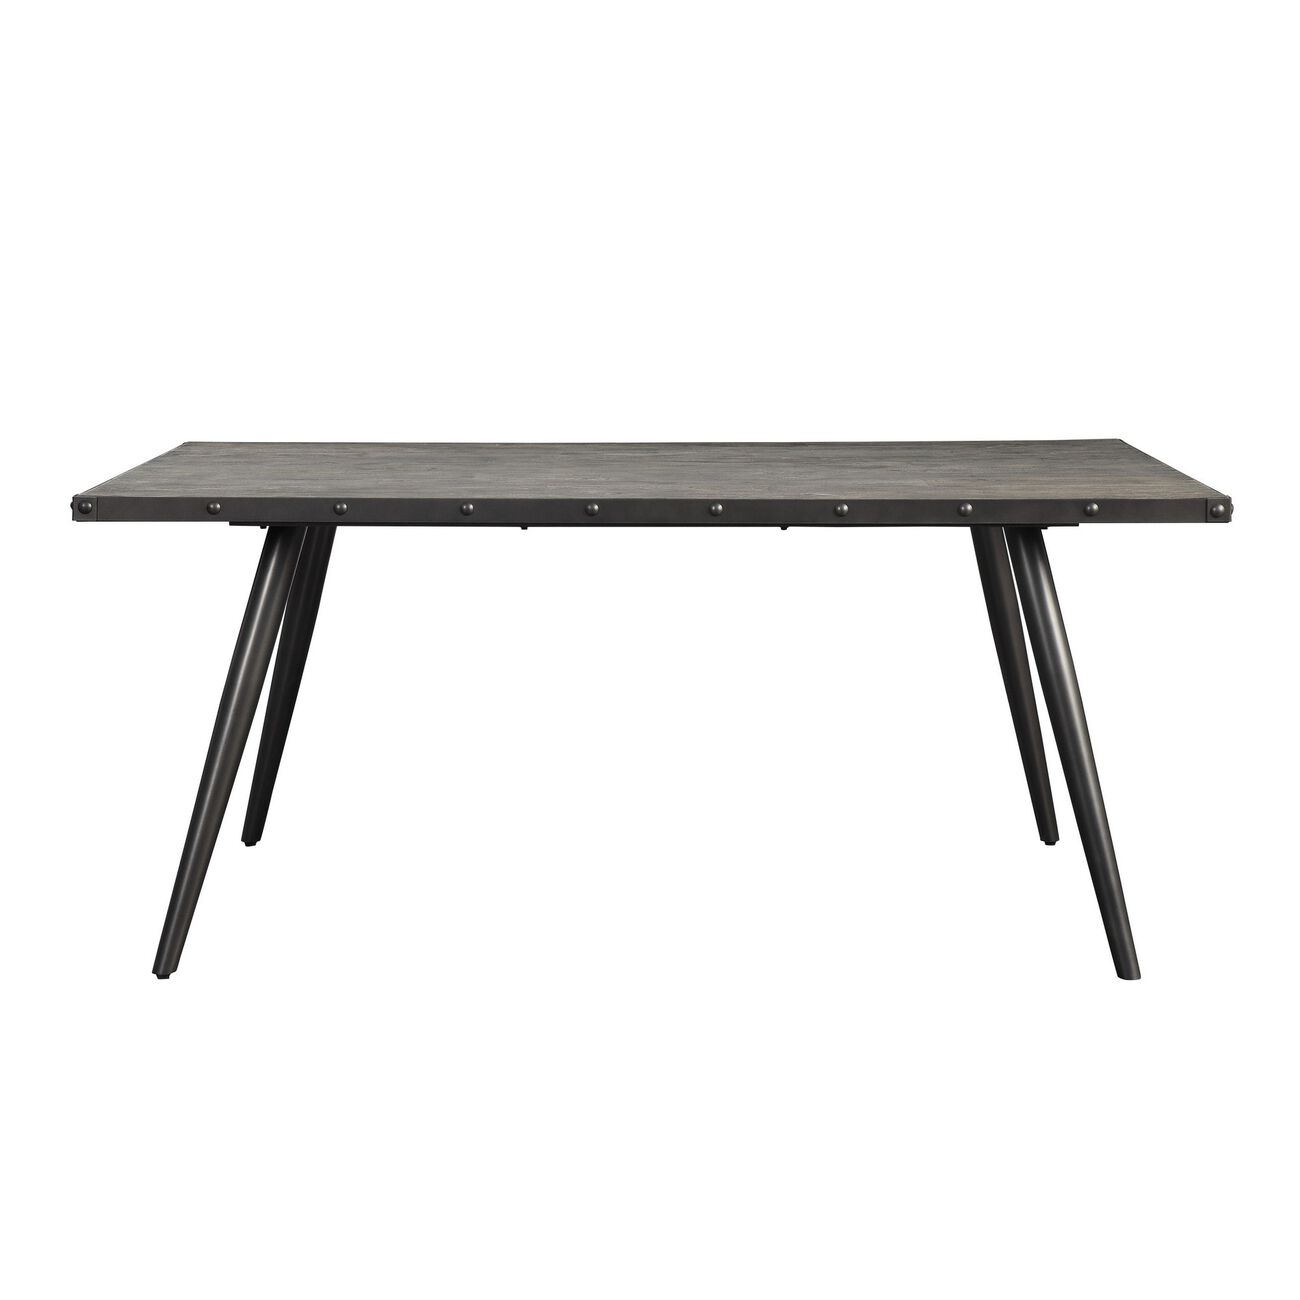 Rectangular Wooden Top Dining Table with Angled Metal Legs, Gray